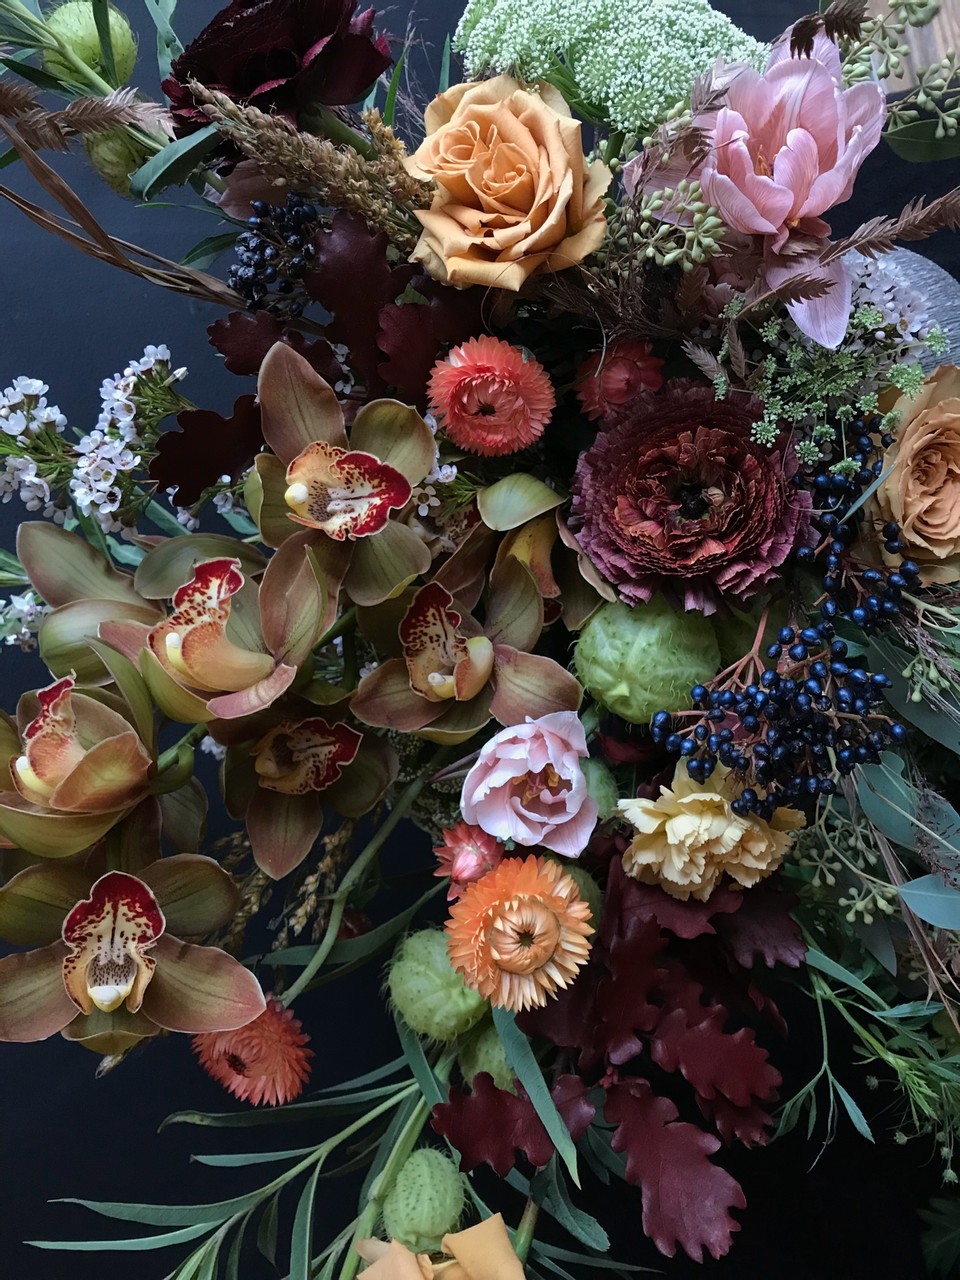 An explosion of dark and neutral florals fill the photos space. Tan Cymbidium orchids mix amongst peach Strawflower, white Queen Anne''s Lace, burgundy Ranuculus, blue berries and Milkweed pods.